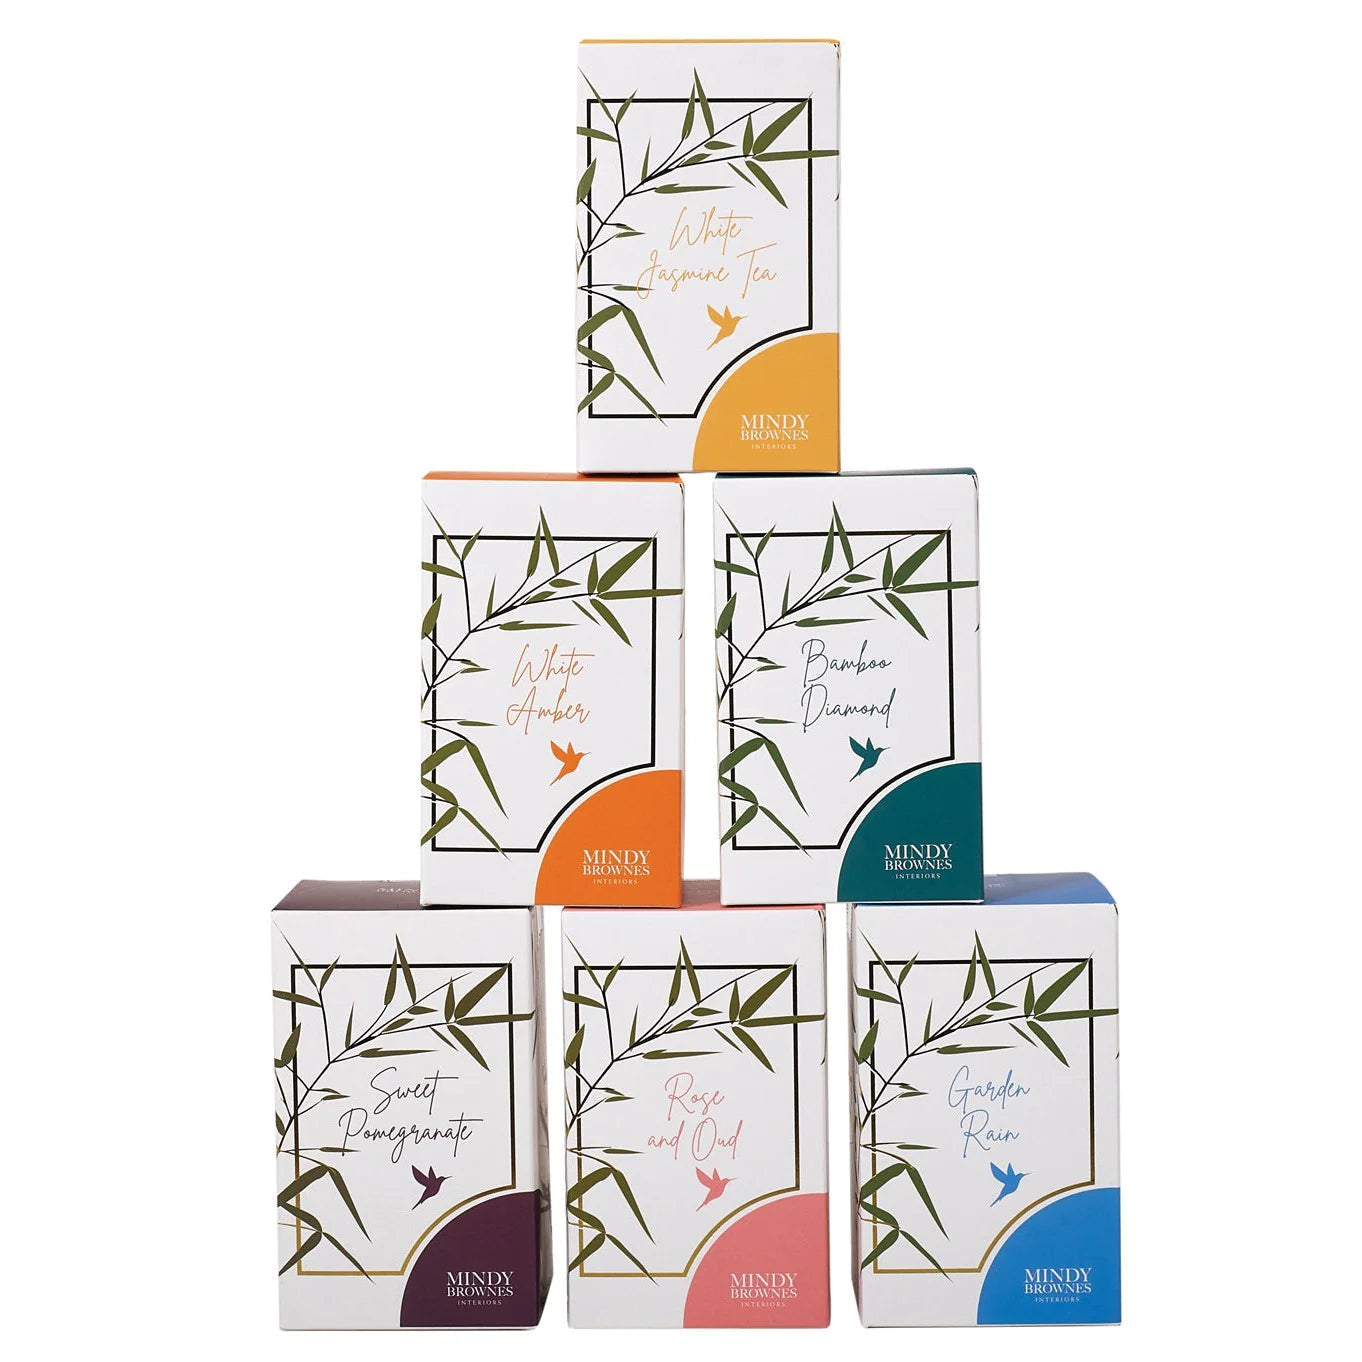 Mindy Brownes Scented Candles - Garden Rain/Bamboo Diamond/White Jasmine/Rose & Oud/White Amber/Sweet Pomegranate